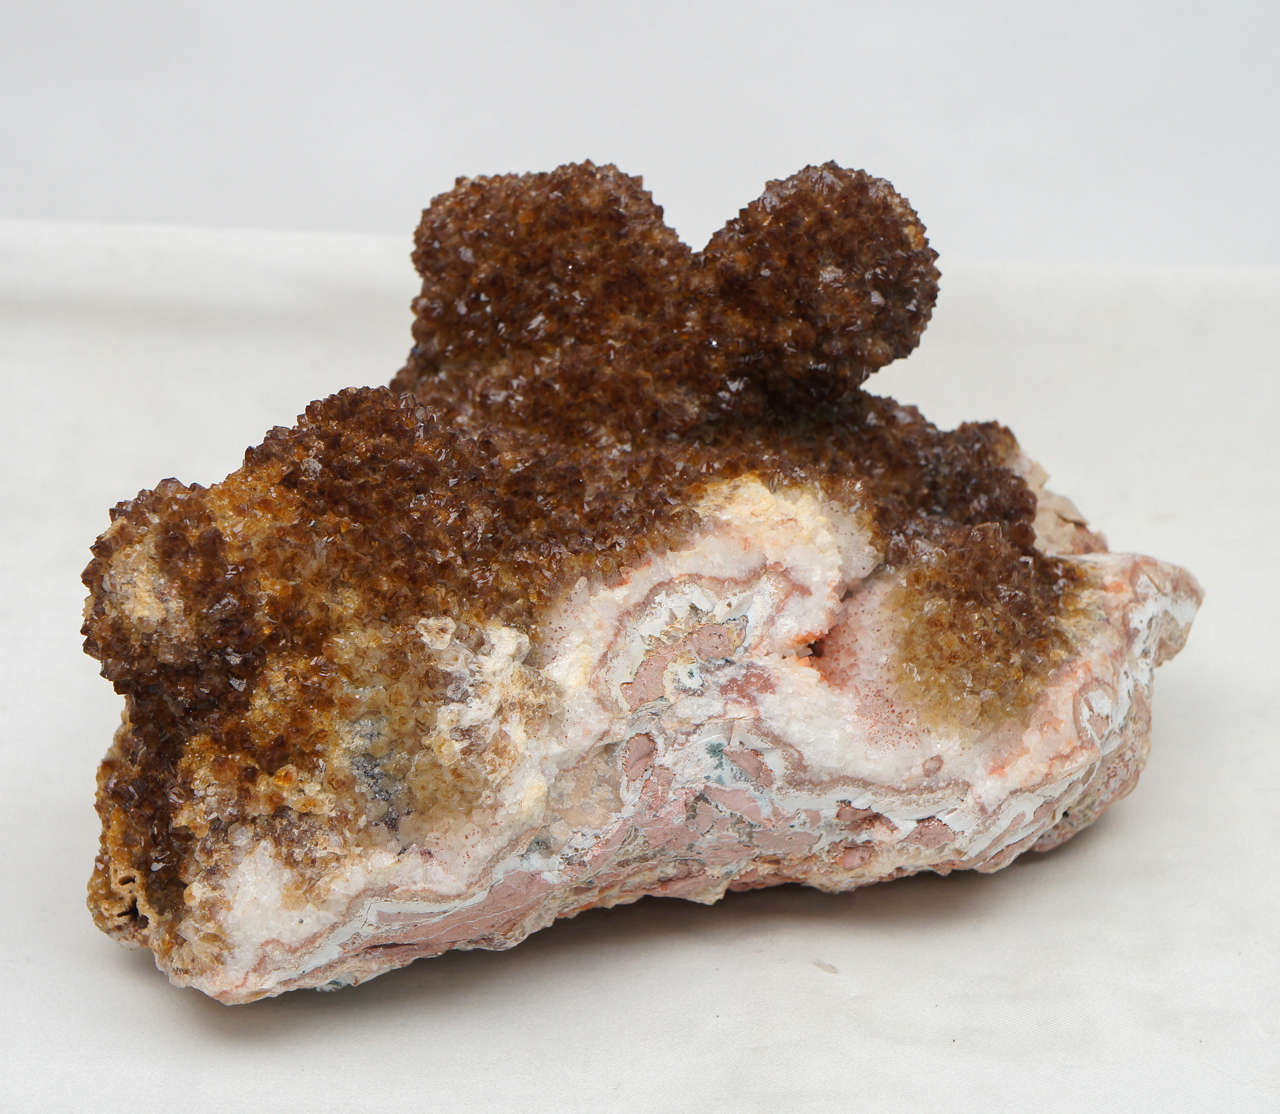 I recently acquired a number of geodes from a serious collector. While they are all exceptional specimens, this one is surely my favorite. The variety of textures is amazing; rich, almost glowing embers on the rough exterior, with shades of pinks